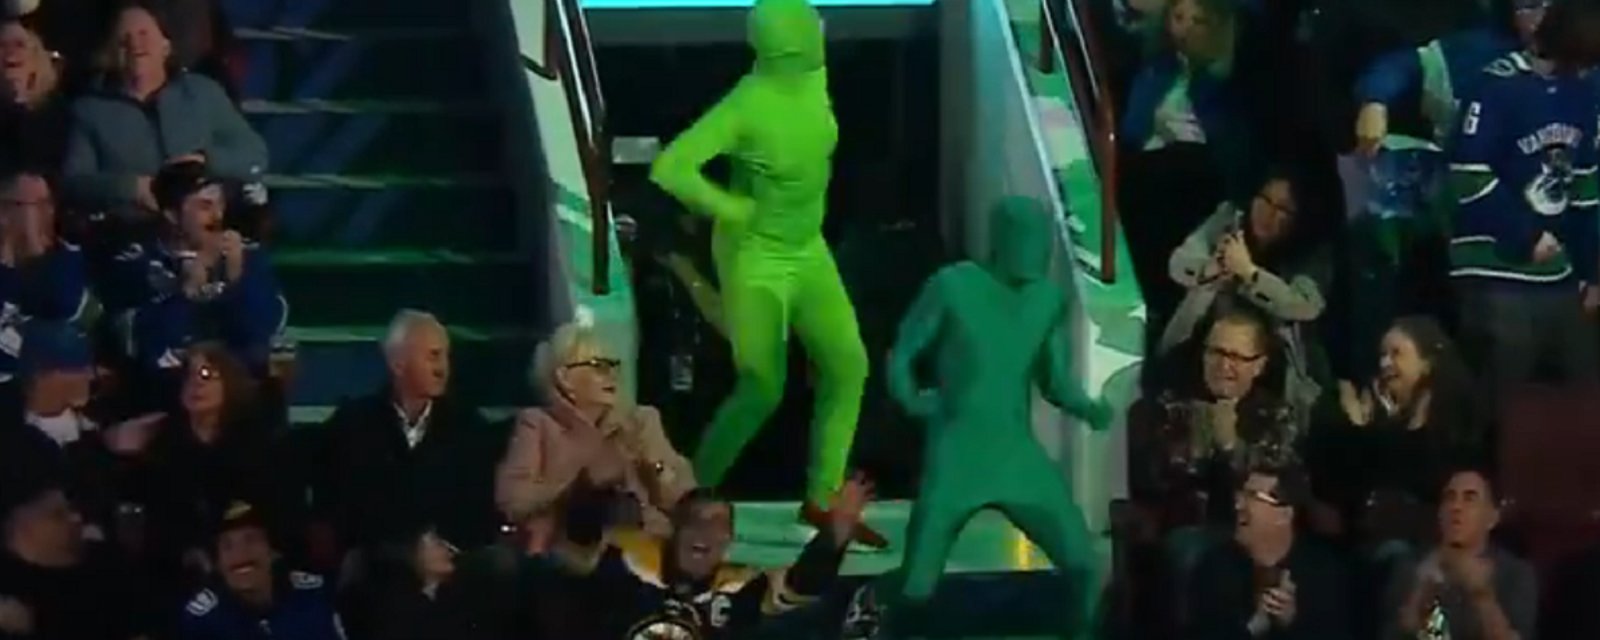 Green Men make their return to Vancouver on Saturday.